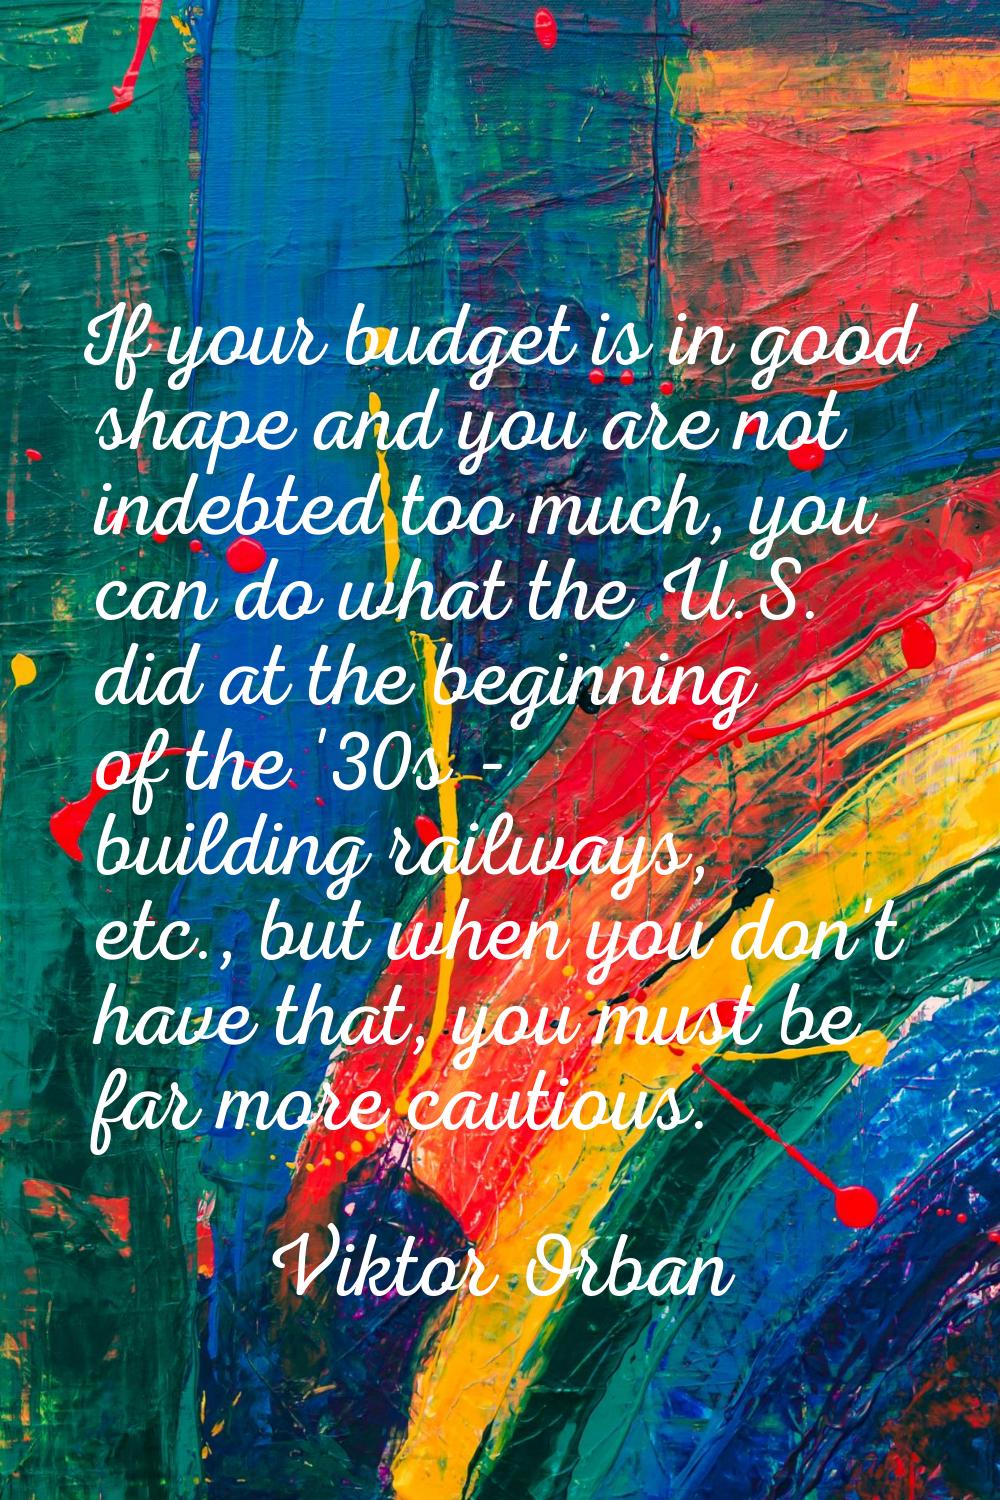 If your budget is in good shape and you are not indebted too much, you can do what the U.S. did at 